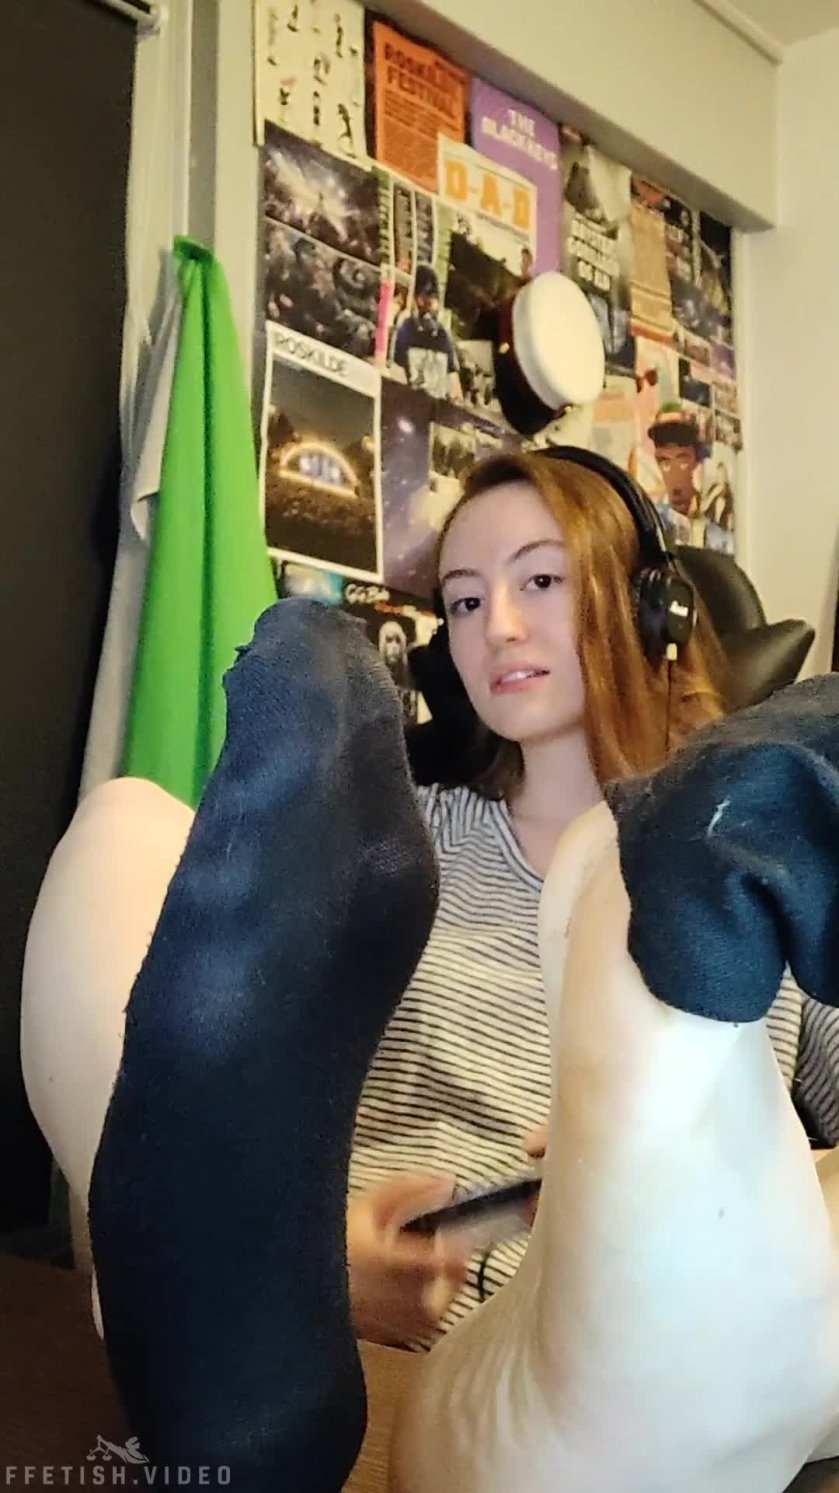 Gamer Girl ignores you while gaming and shows off her smelly black gym socks - Worldwide Models